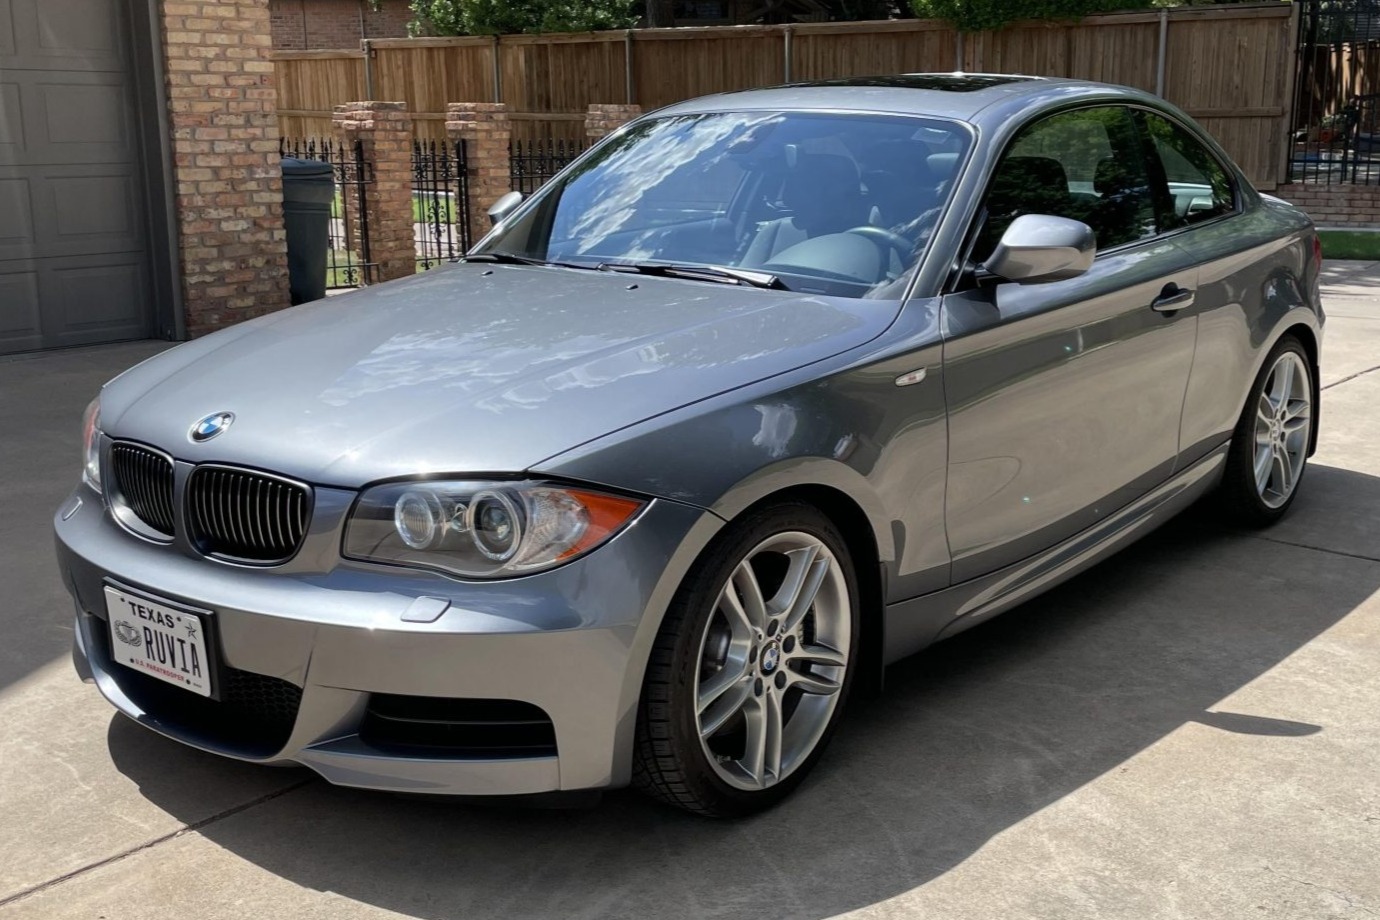 Used 17k-Mile 2010 BMW 135i Coupe M Sport Review